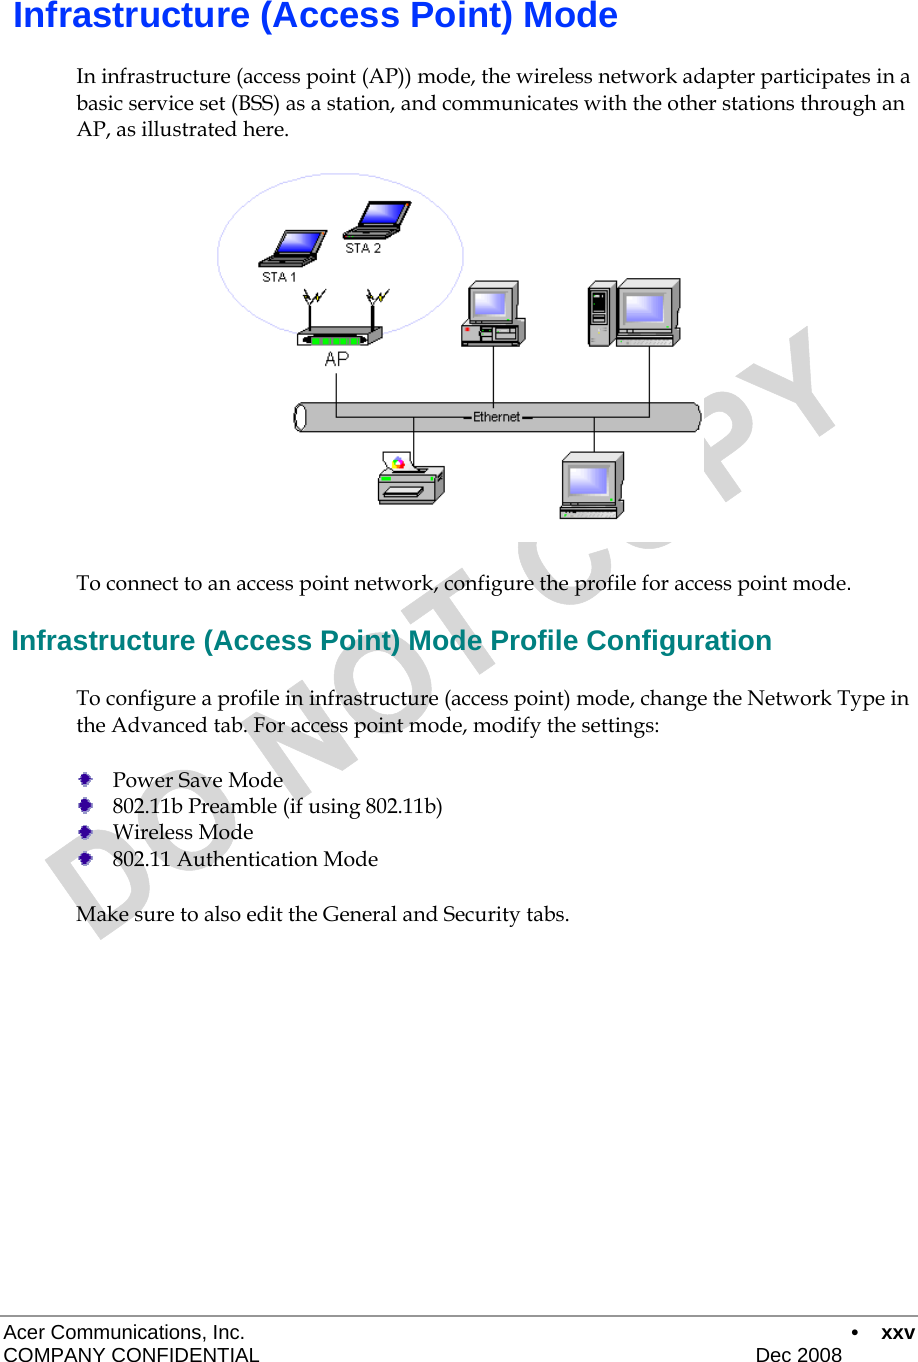  Acer Communications, Inc.      • xxv COMPANY CONFIDENTIAL    Dec 2008    Infrastructure (Access Point) Mode In infrastructure (access point (AP)) mode, the wireless network adapter participates in a basic service set (BSS) as a station, and communicates with the other stations through an AP, as illustrated here.  To connect to an access point network, configure the profile for access point mode.  Infrastructure (Access Point) Mode Profile Configuration To configure a profile in infrastructure (access point) mode, change the Network Type in the Advanced tab. For access point mode, modify the settings:  Power Save Mode  802.11b Preamble (if using 802.11b)  Wireless Mode  802.11 Authentication Mode Make sure to also edit the General and Security tabs.     